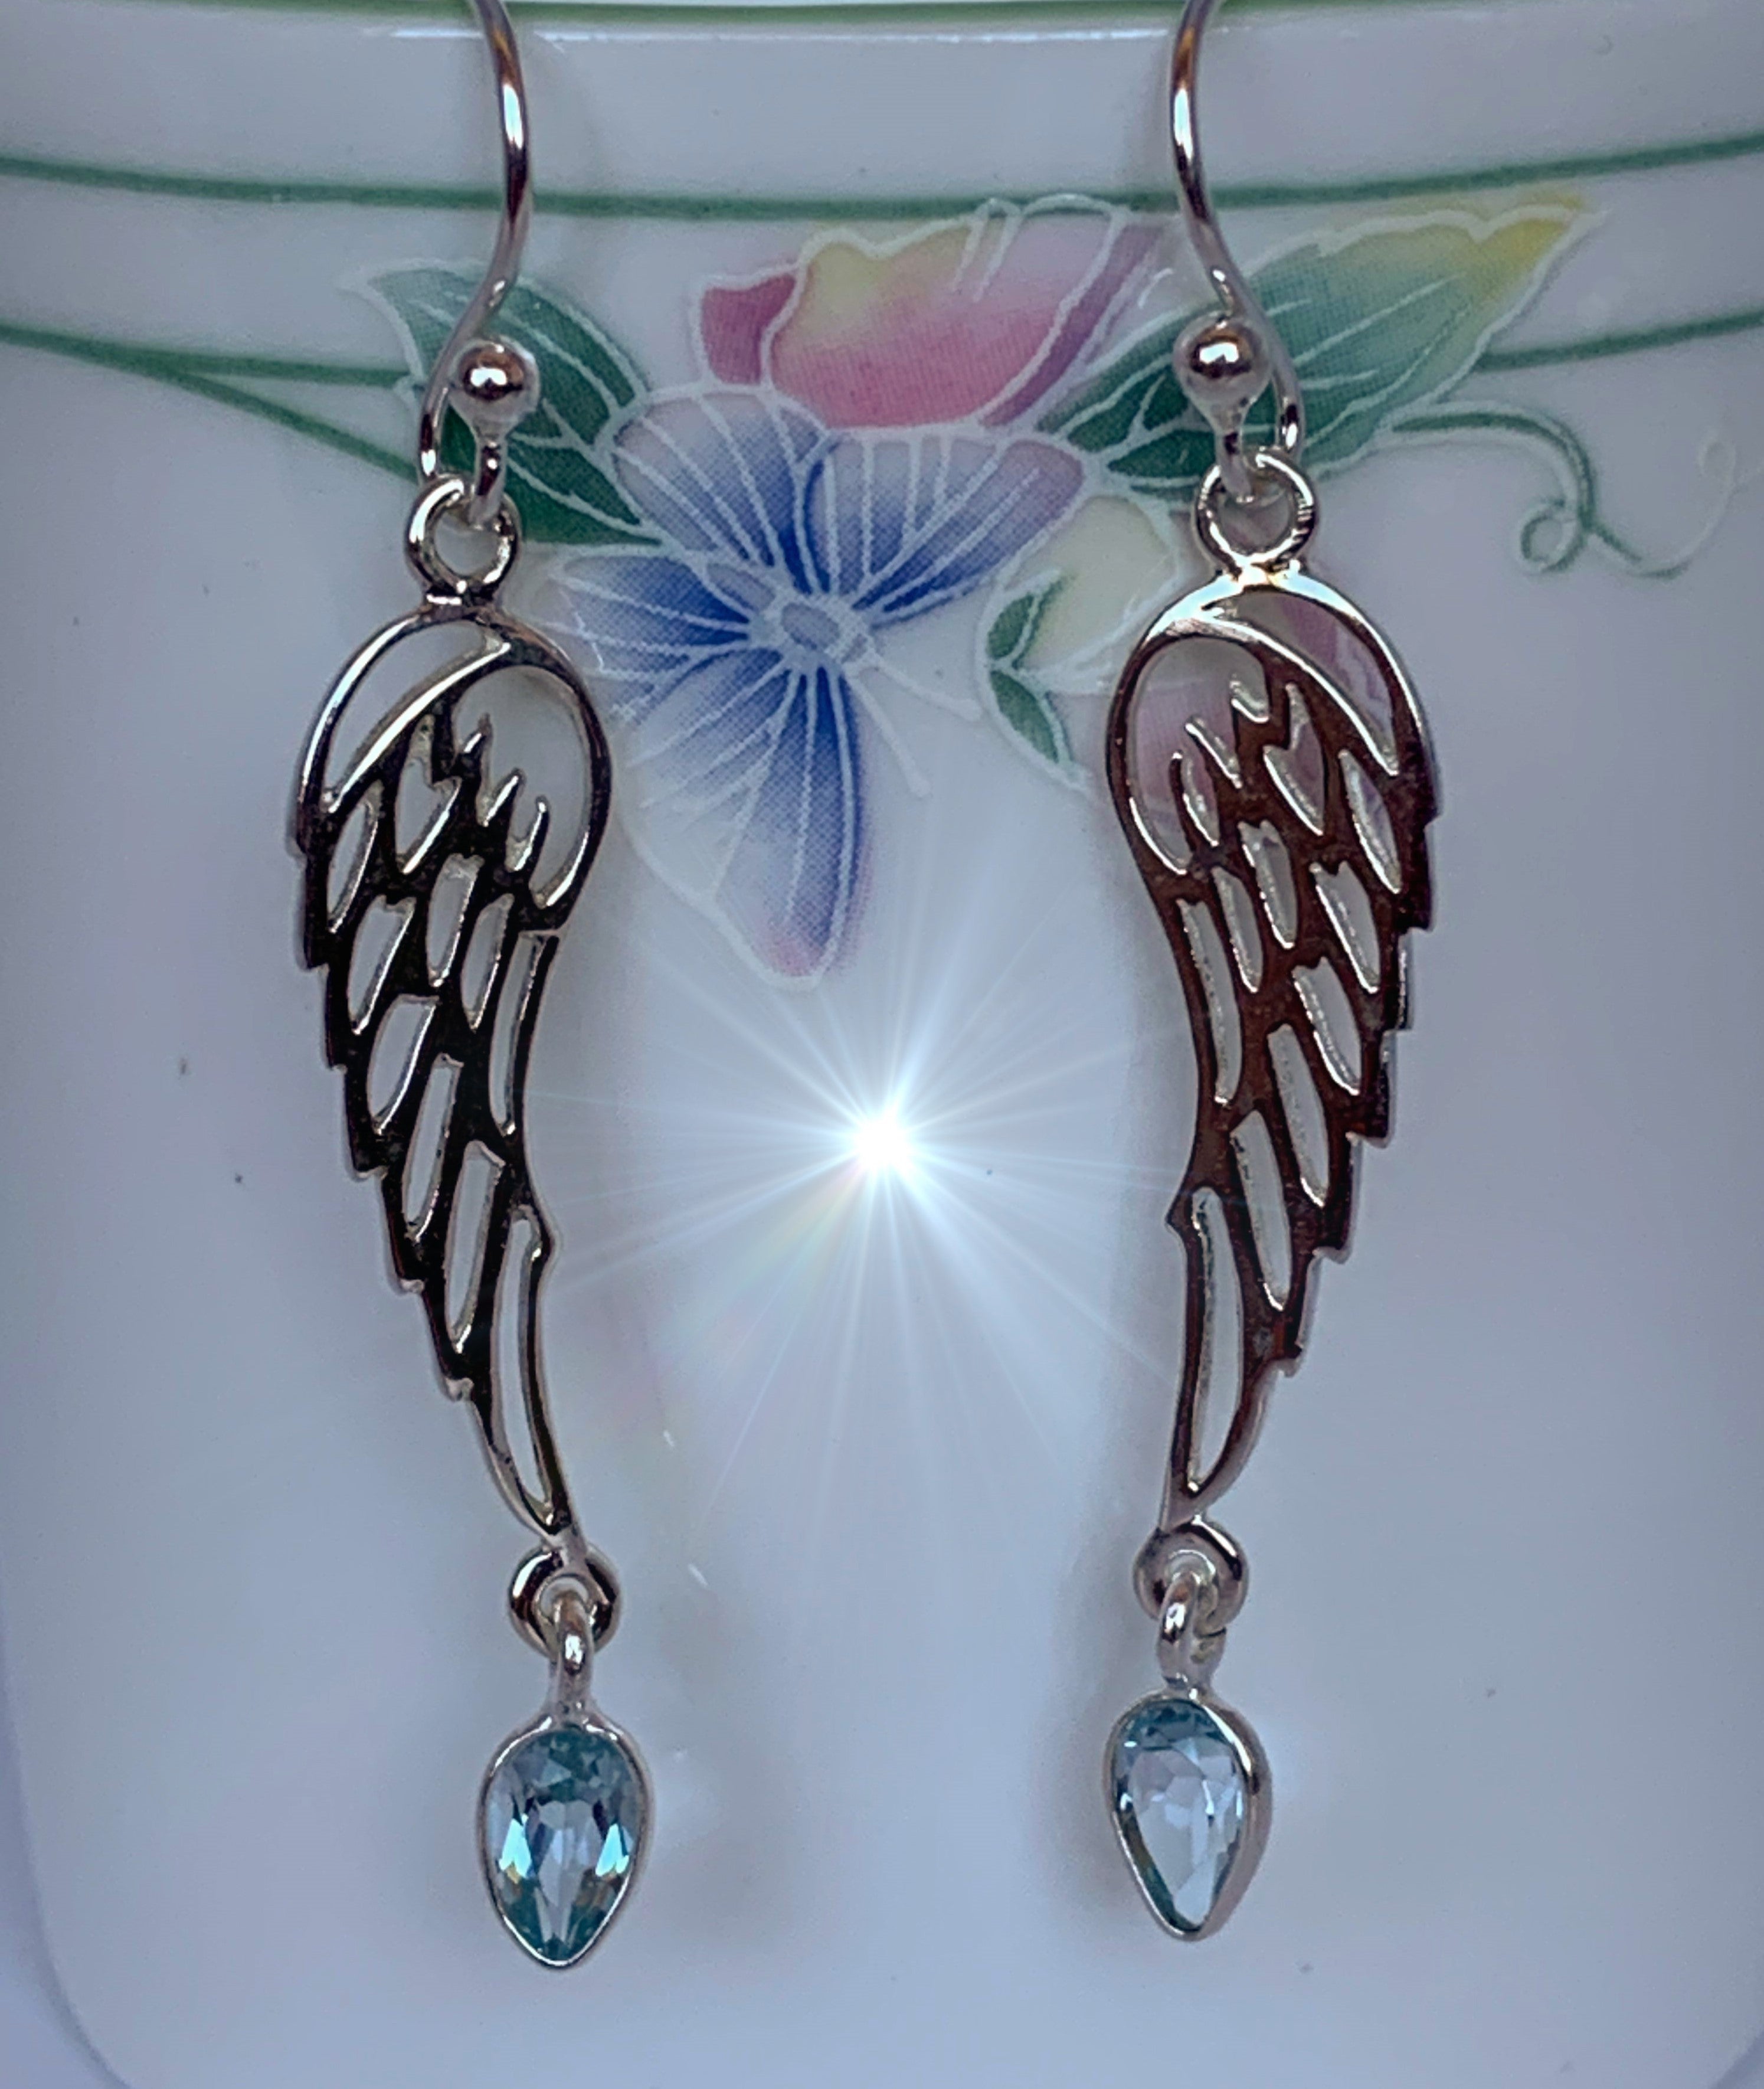  Close-up view. Pear shaped blue topaz dangle from open sterling silver angel wings. These earrings are lightweight, have wires, not posts for wearing and are approximately 1 ¾" long.